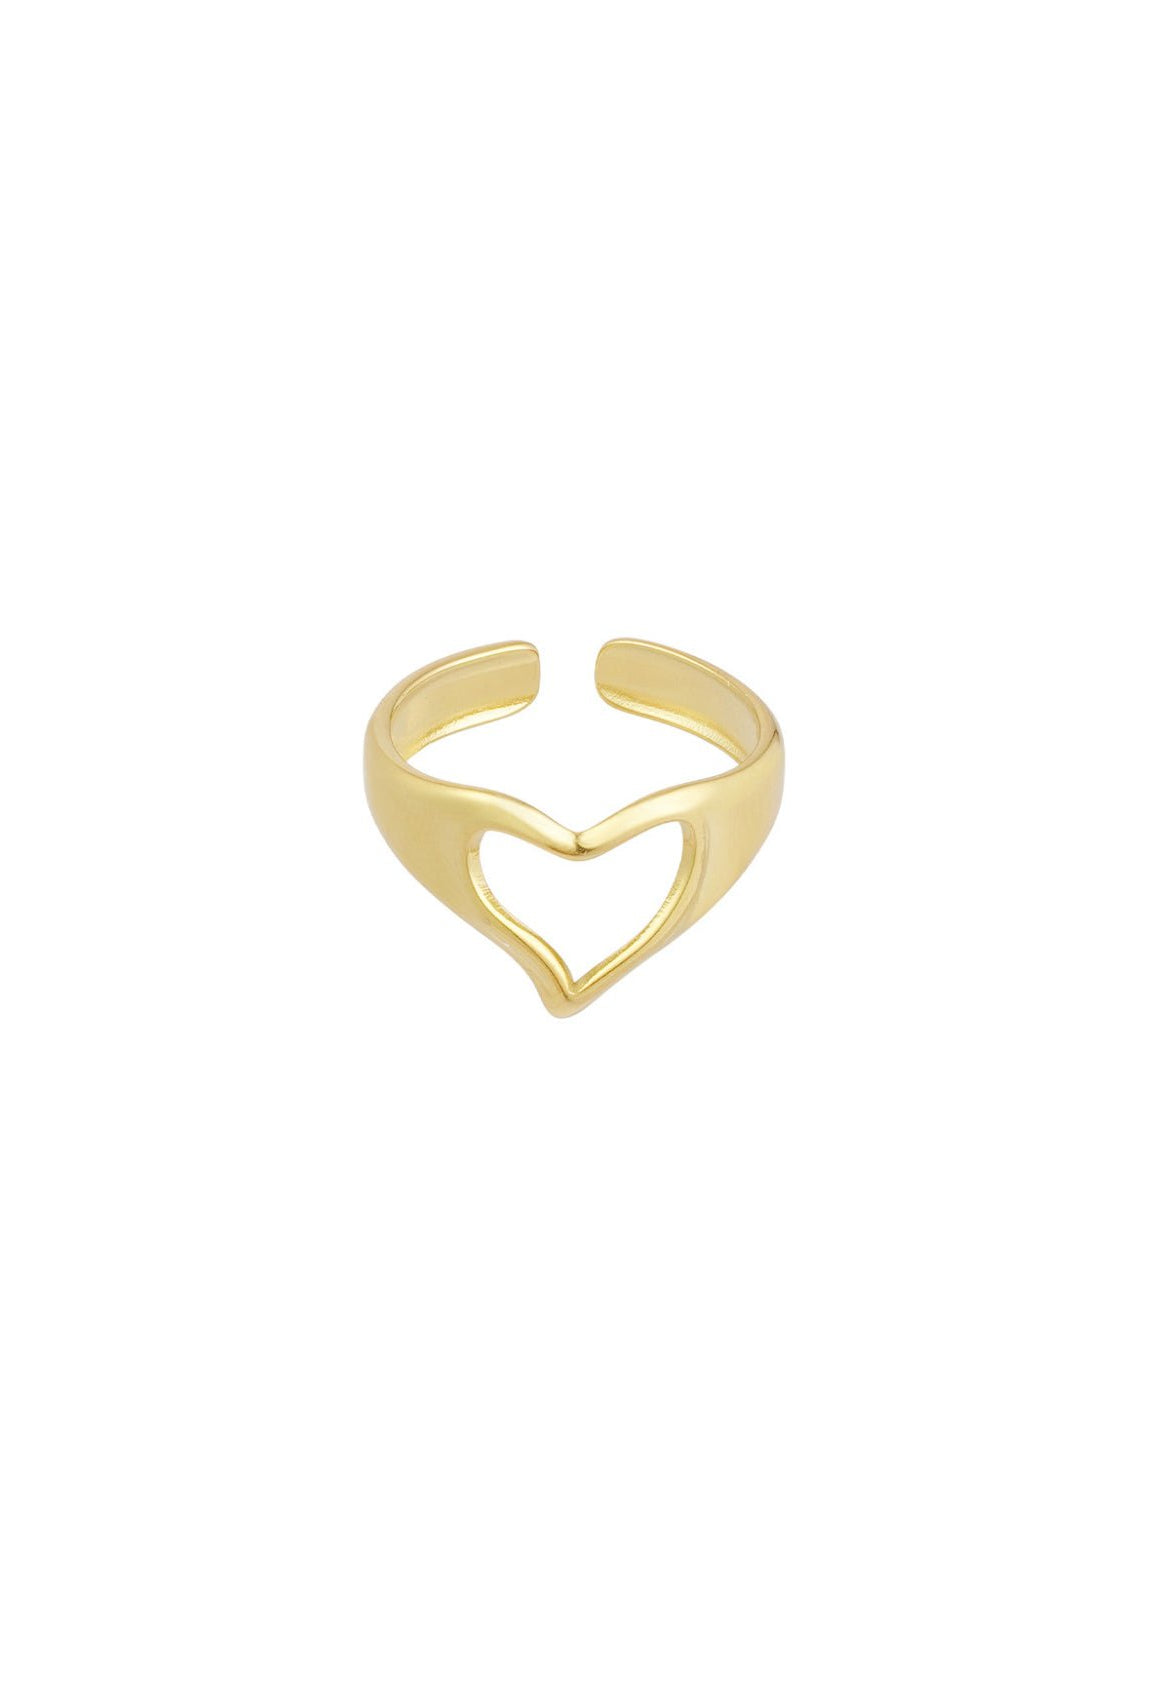 Love hands ring -